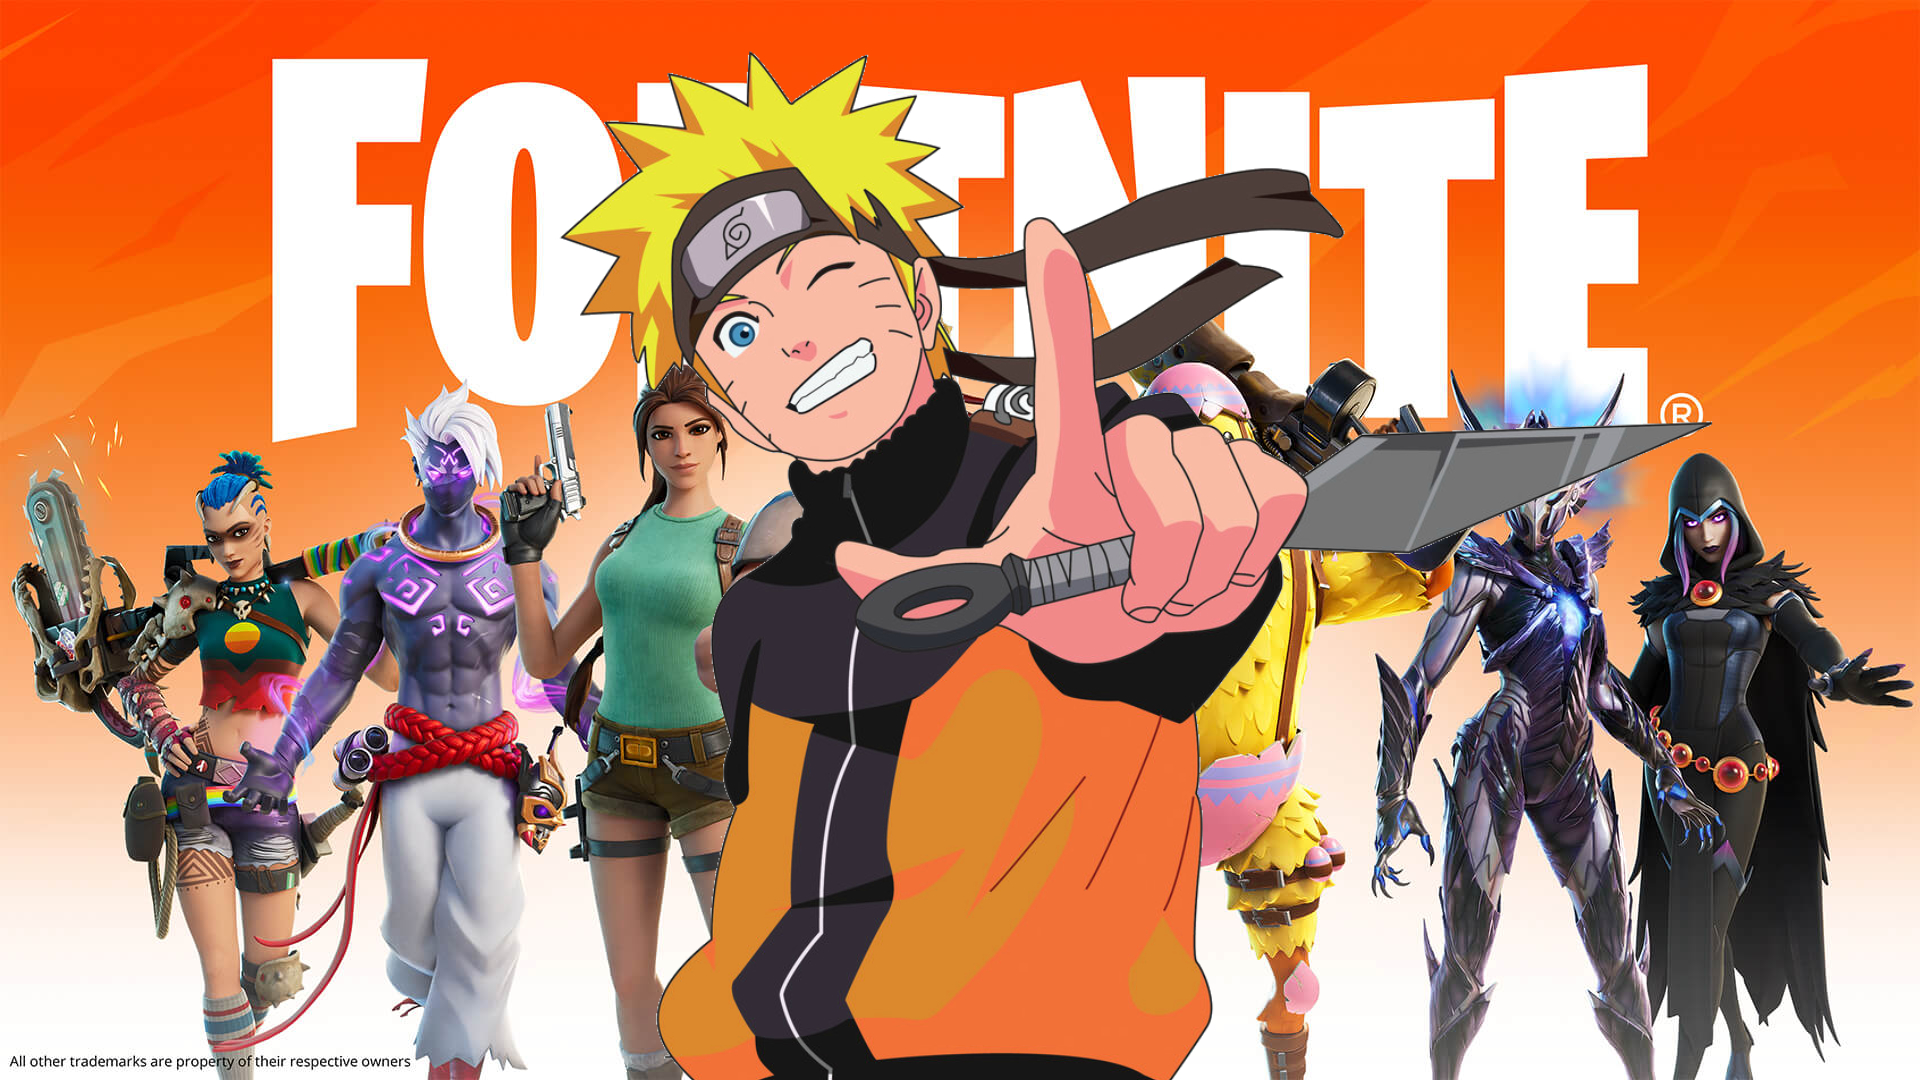 Naruto is coming to Fortnite